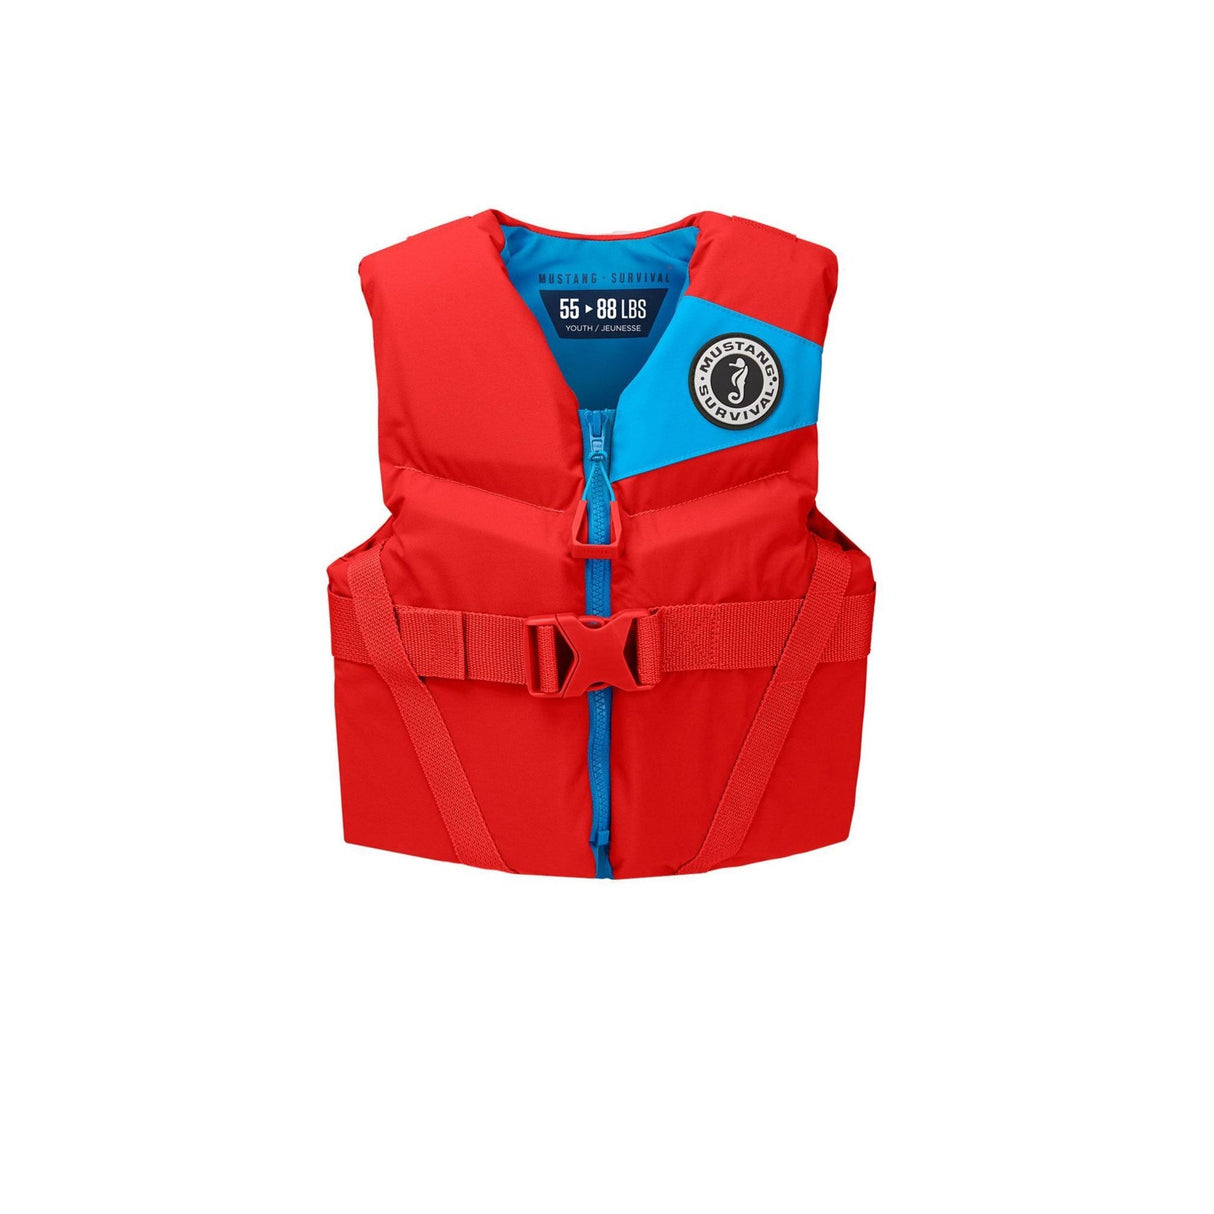 MUSTANG REV YOUTH FOAM VEST IMPERIAL RED